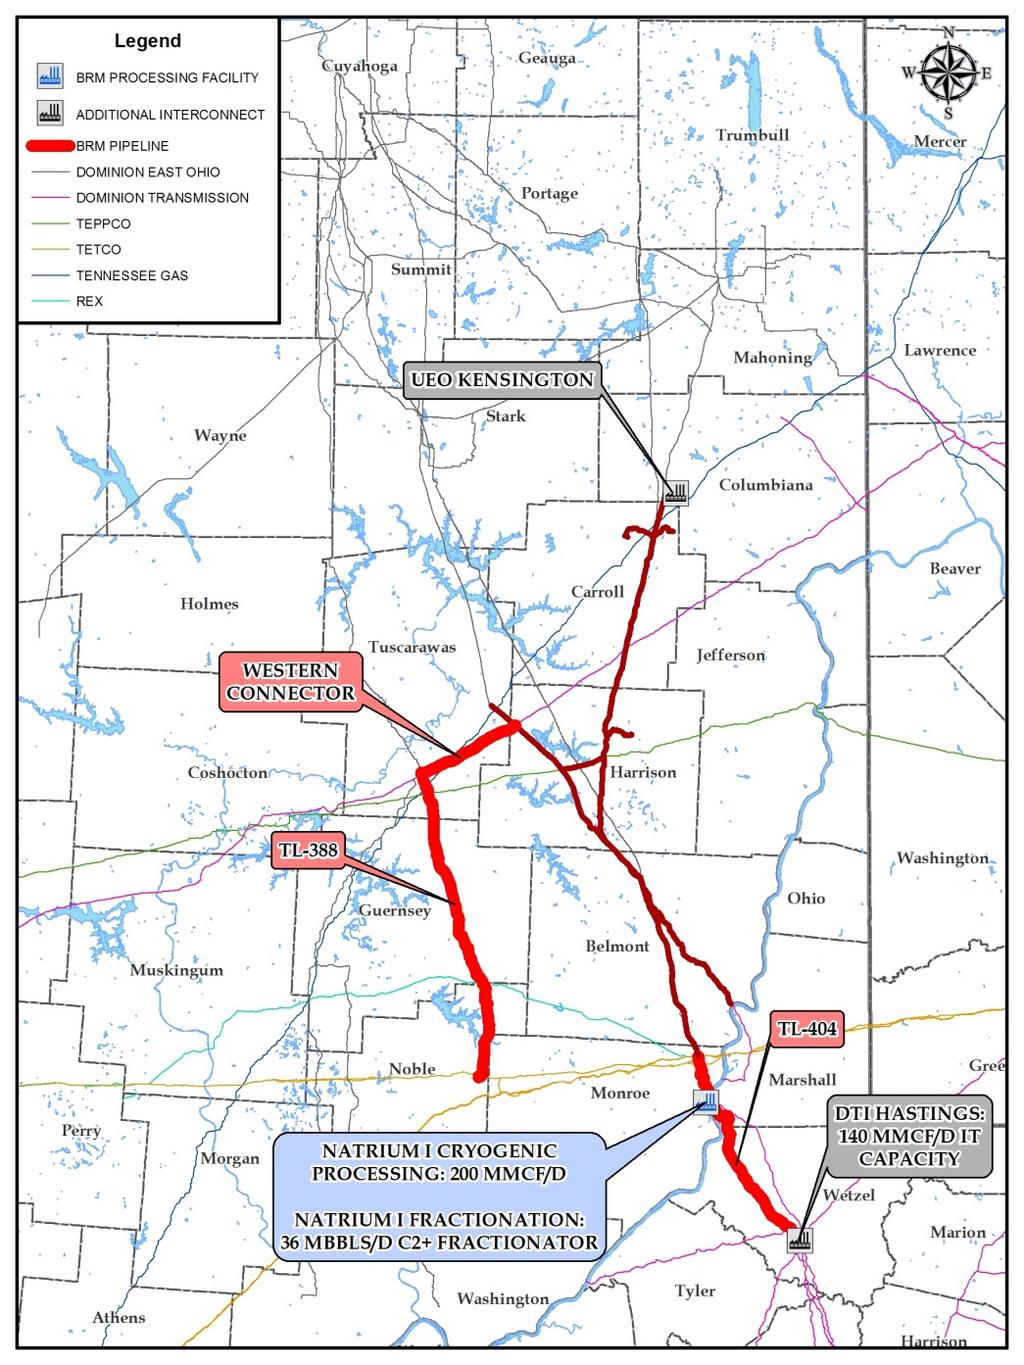 Current Assets BRM has been successfully executing its business plan since formation Assets as of Q3 2013 TPL 7 66 miles of 18 TPL 3 42 miles of 30 TPL 2 11 miles of 18 TL-404 26 miles of 24 Western